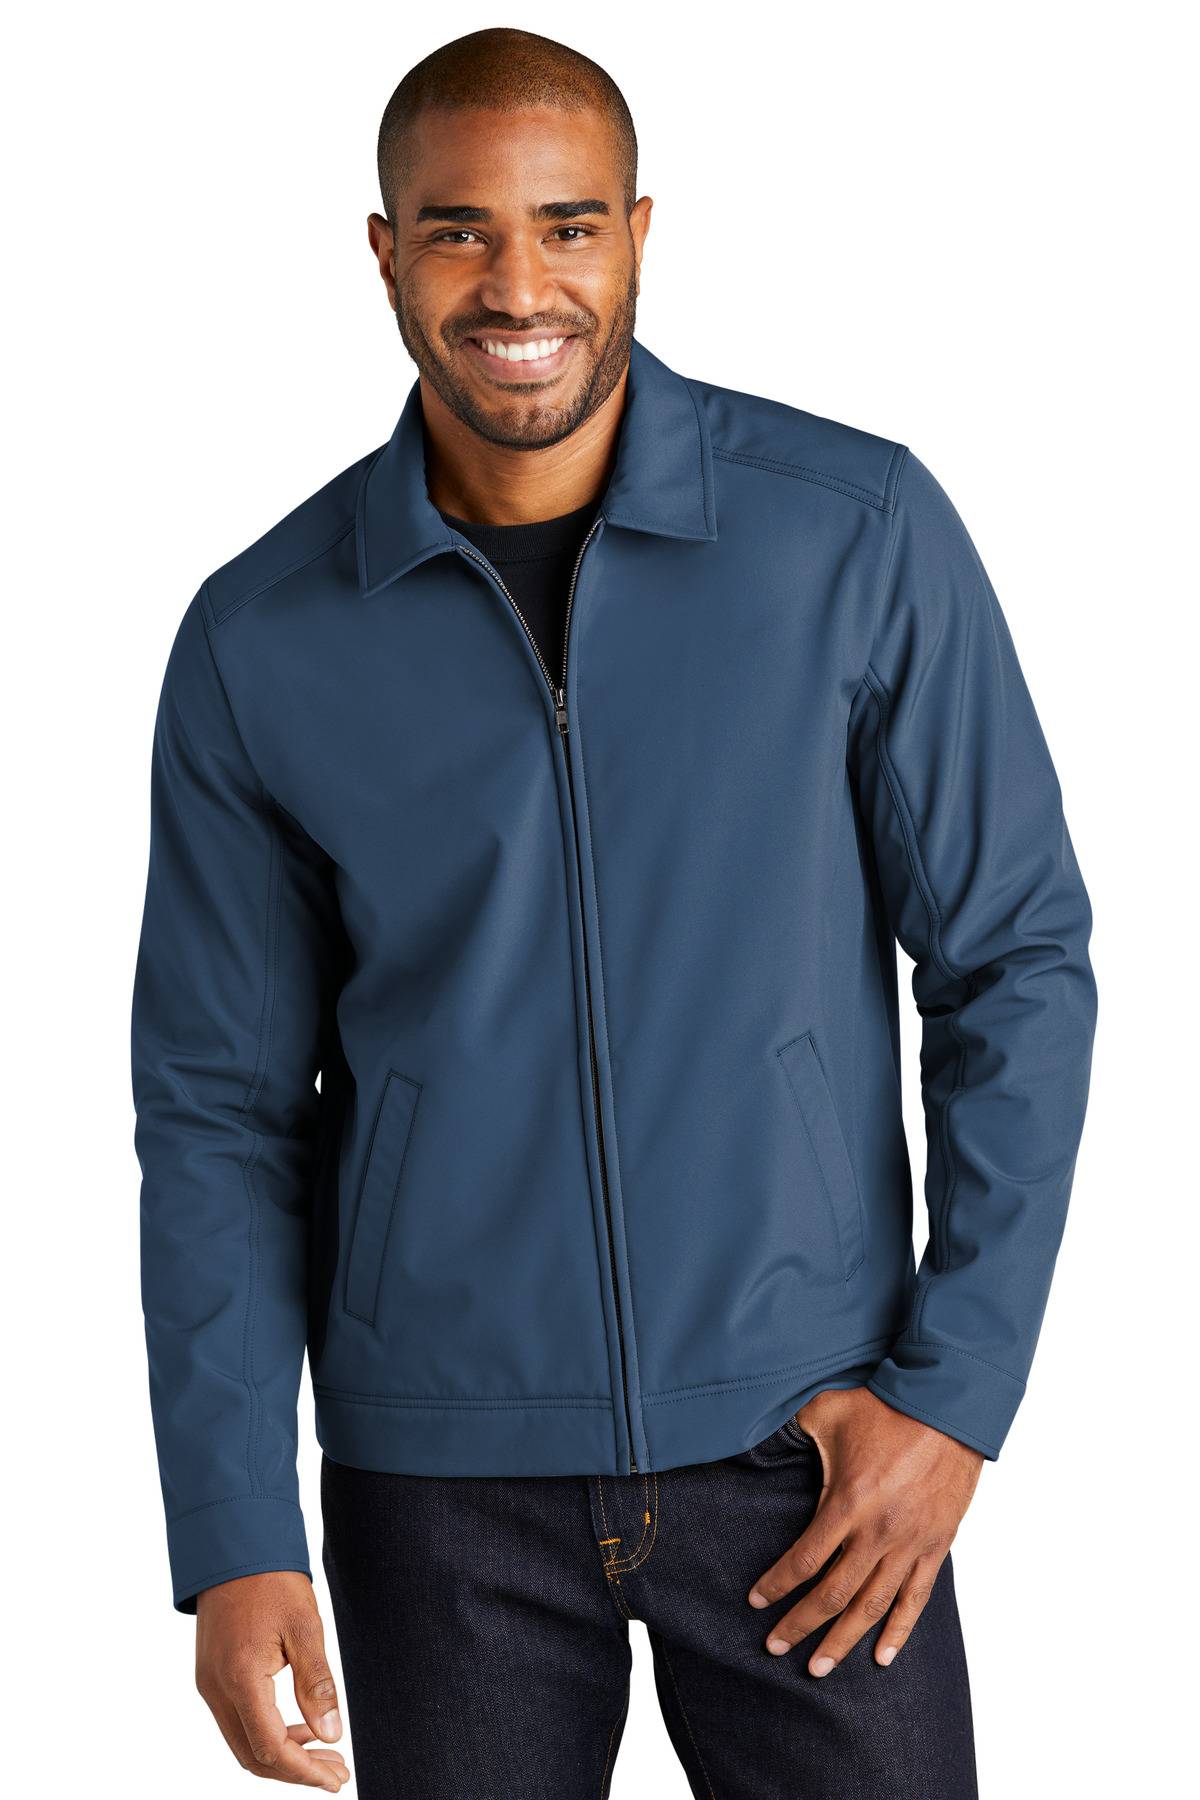 Port Authority J417 Mens Long Sleeve Water Resistant Mechanic Soft Shell Jacket With Pockets